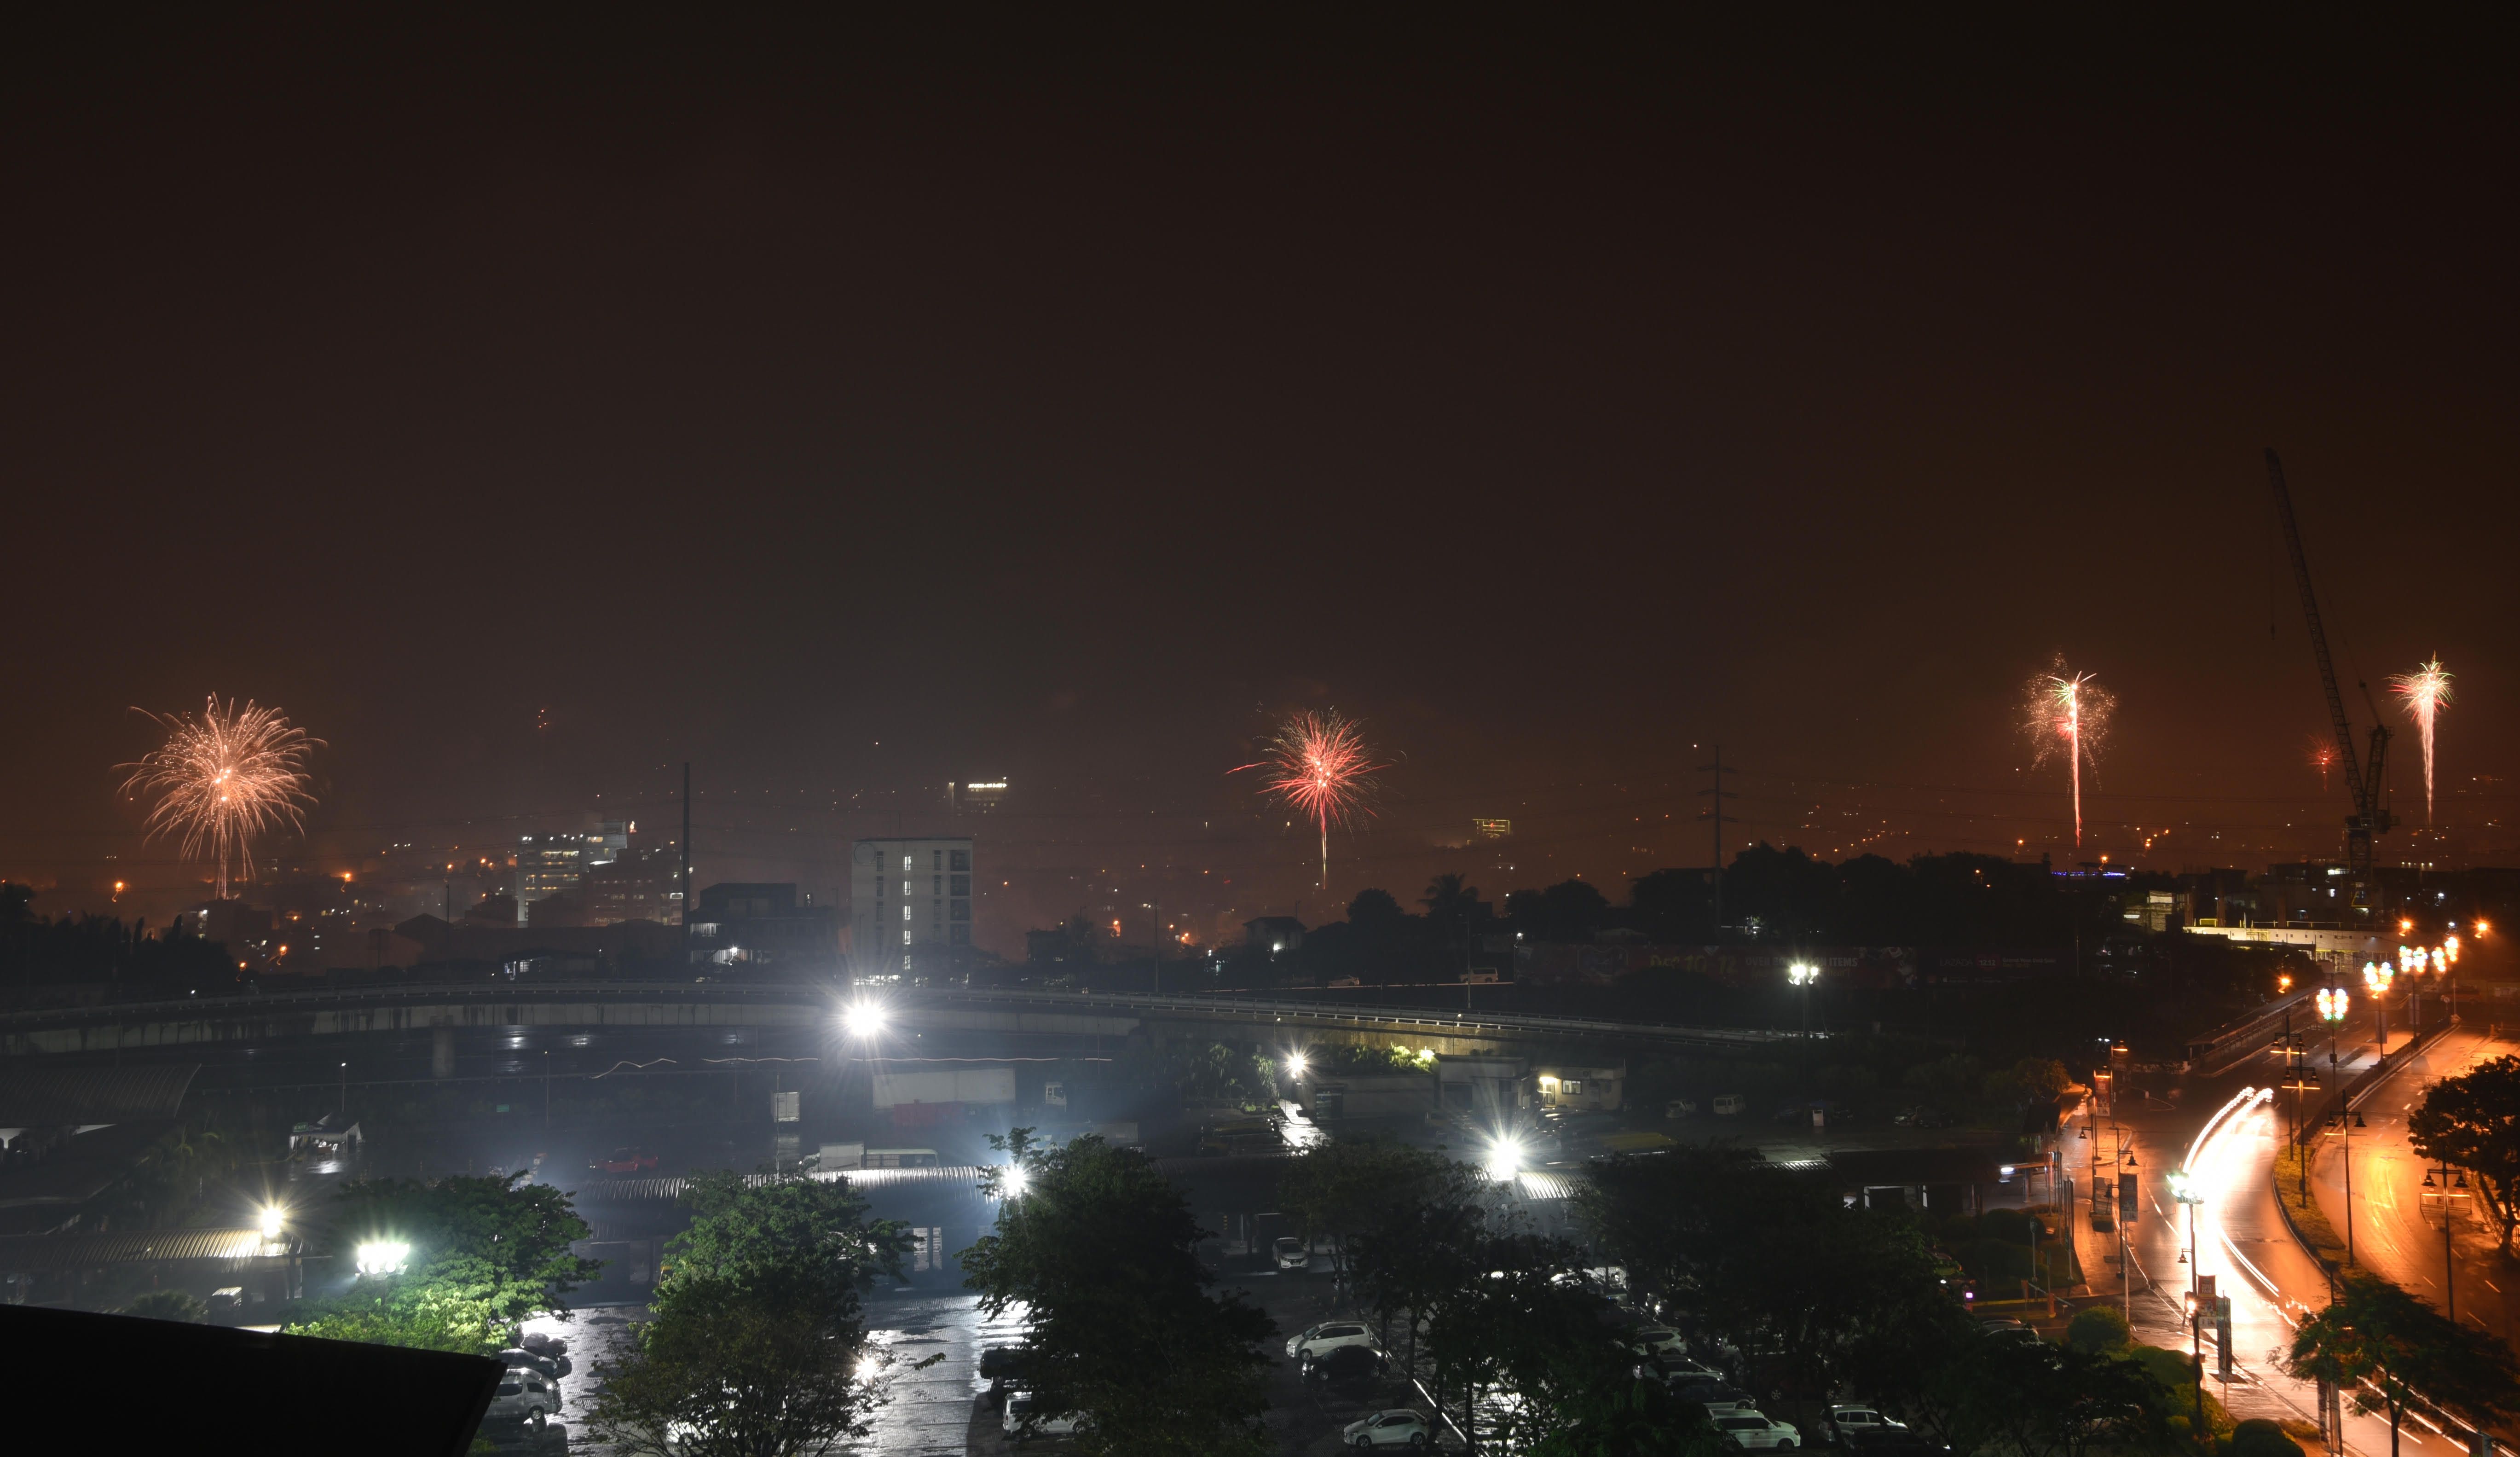 LOOK: It’s fireworks as usual despite the rain